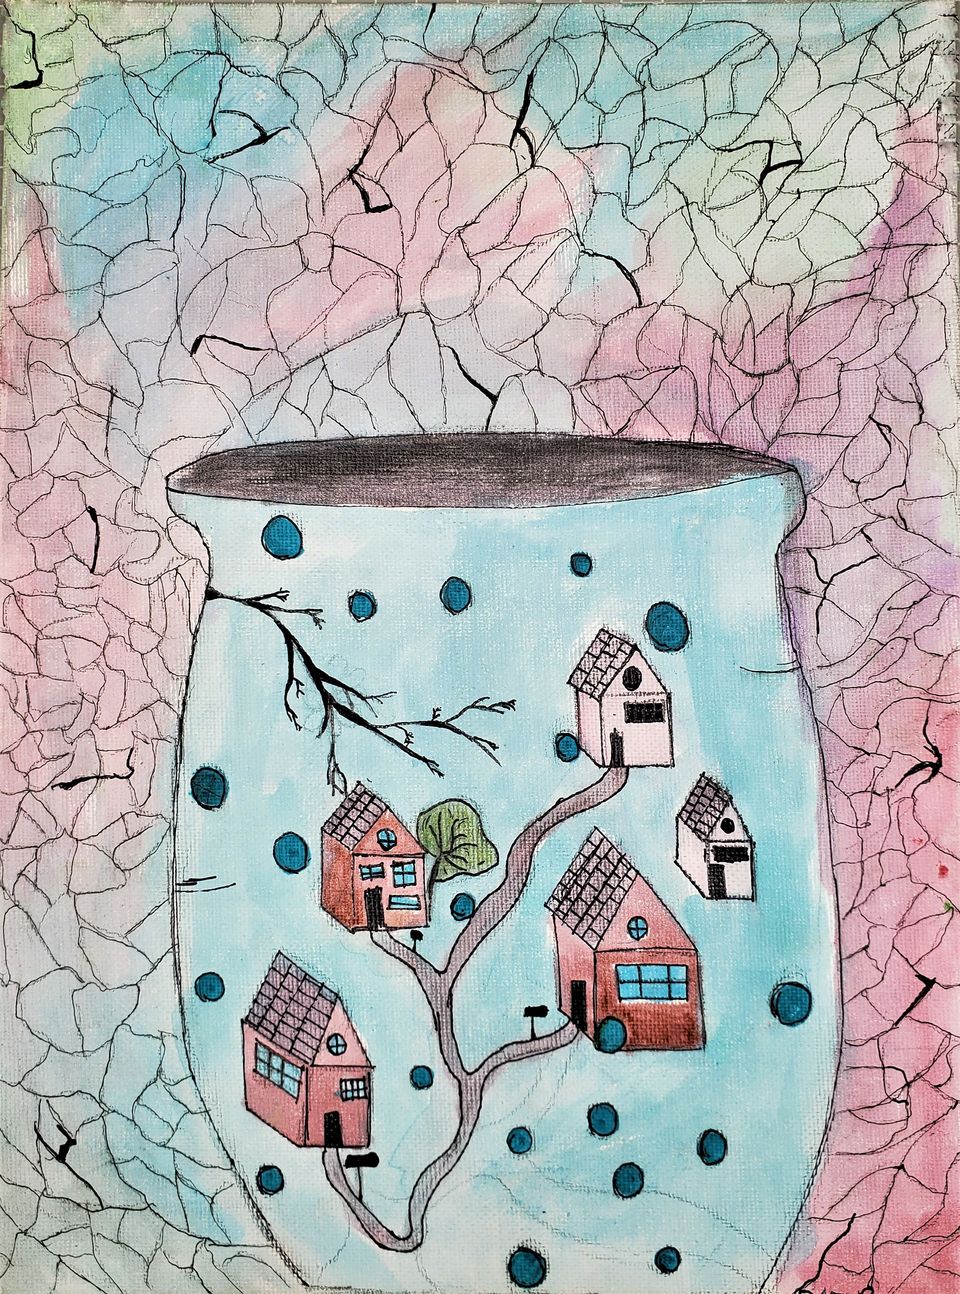 A drawing of a vase with houses on it